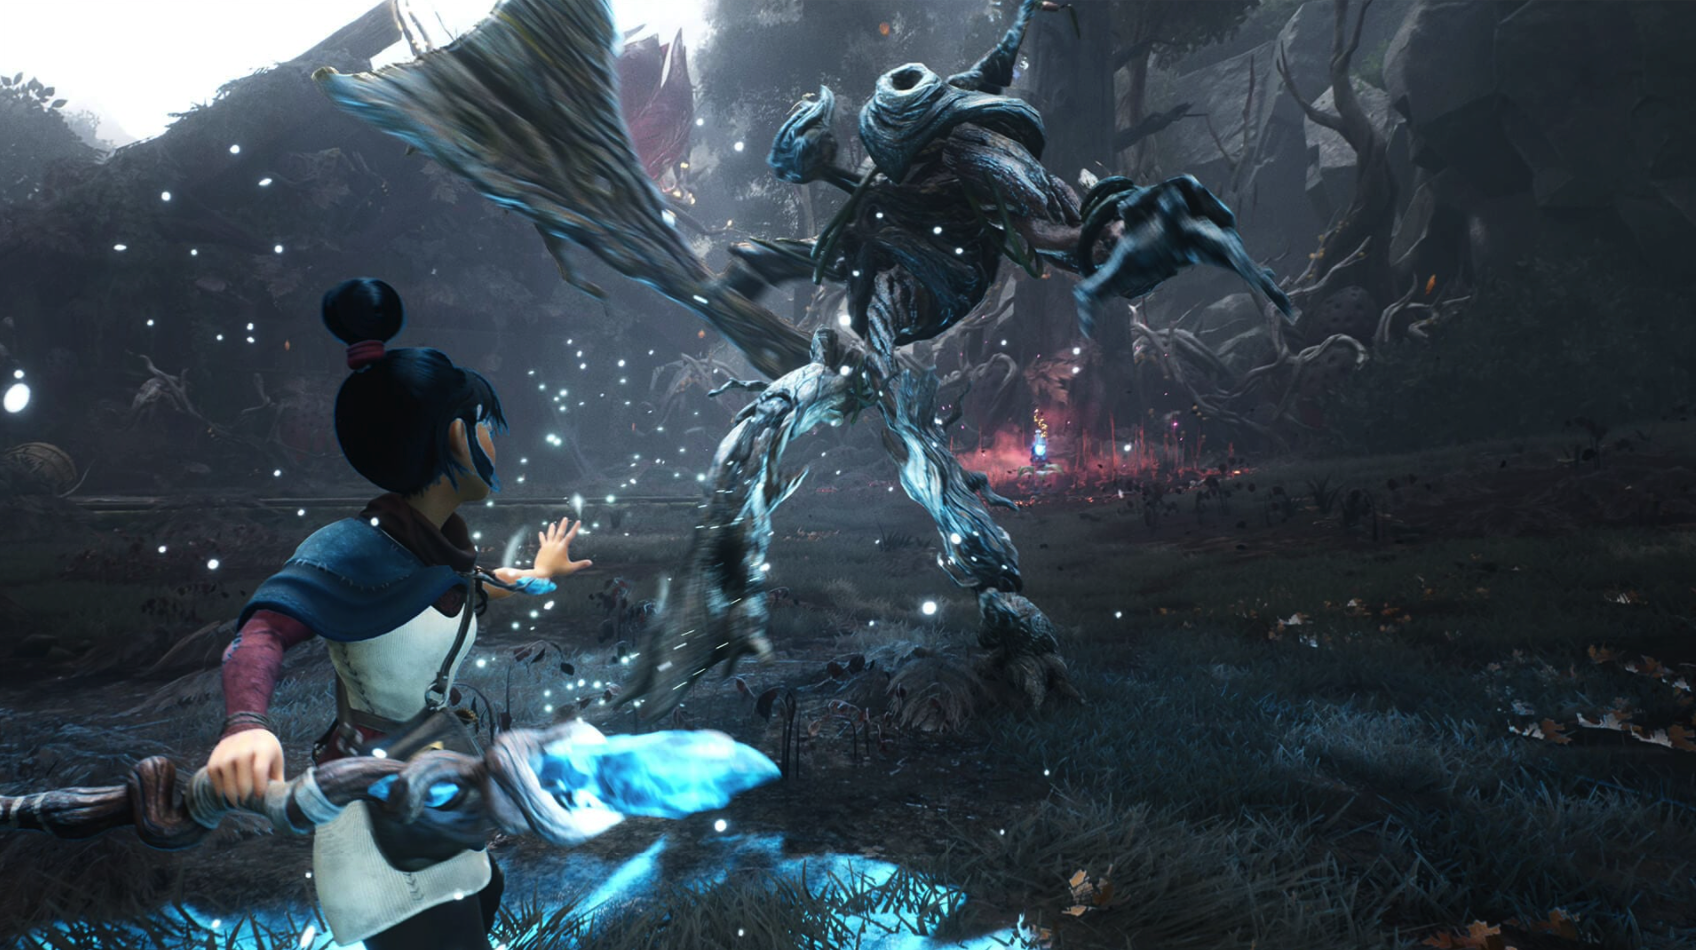 An over the shoulder view of a young woman fighting a tall, tree-like monster in a forest clearing. She has one hand pointed towards the creature, while she holds a glowing, blue wooden staff in her other hand.